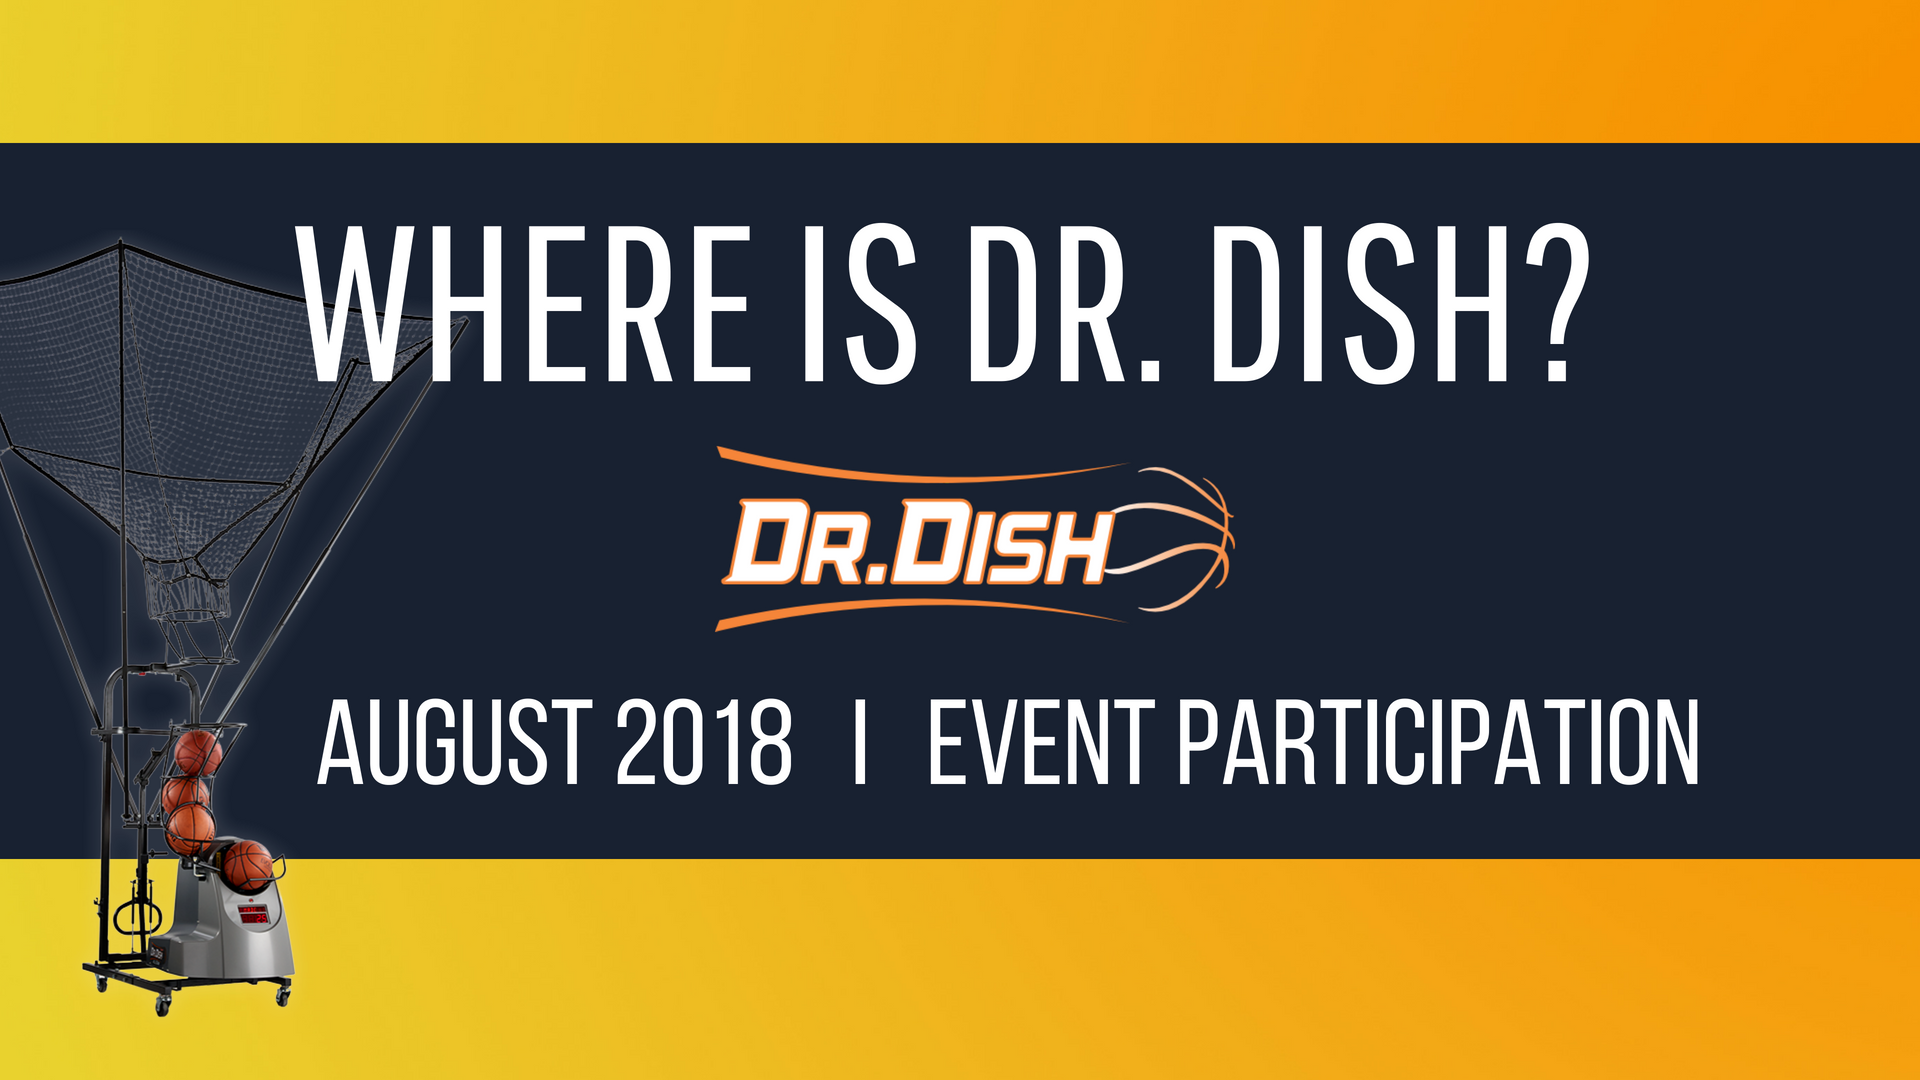 Where is Dr. dish_September 2018event participation